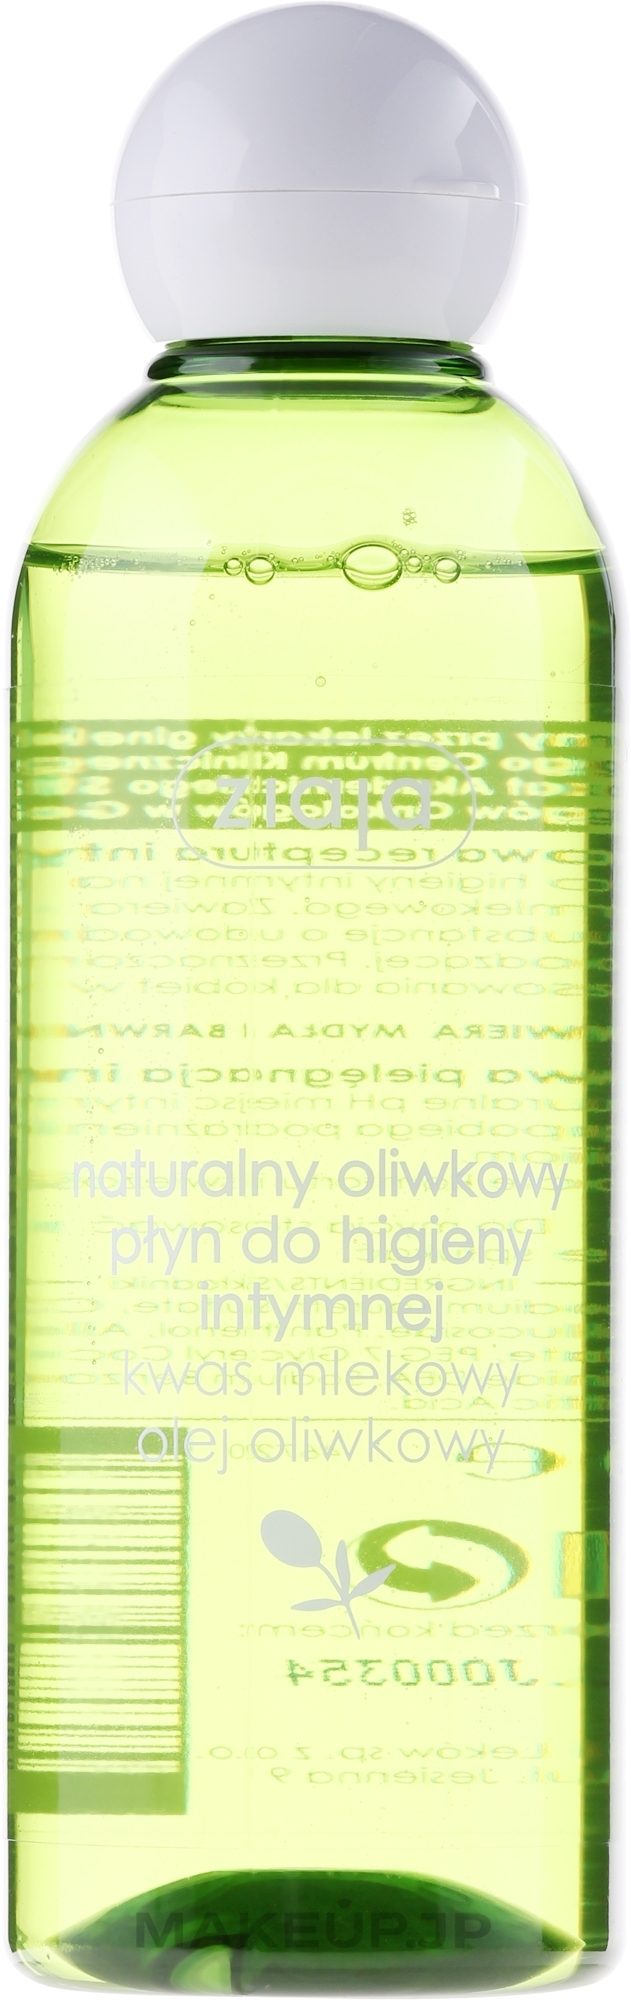 Intimate Cleanser "Natural Olive" - Ziaja Intimate cleanser Soothing — photo 200 ml